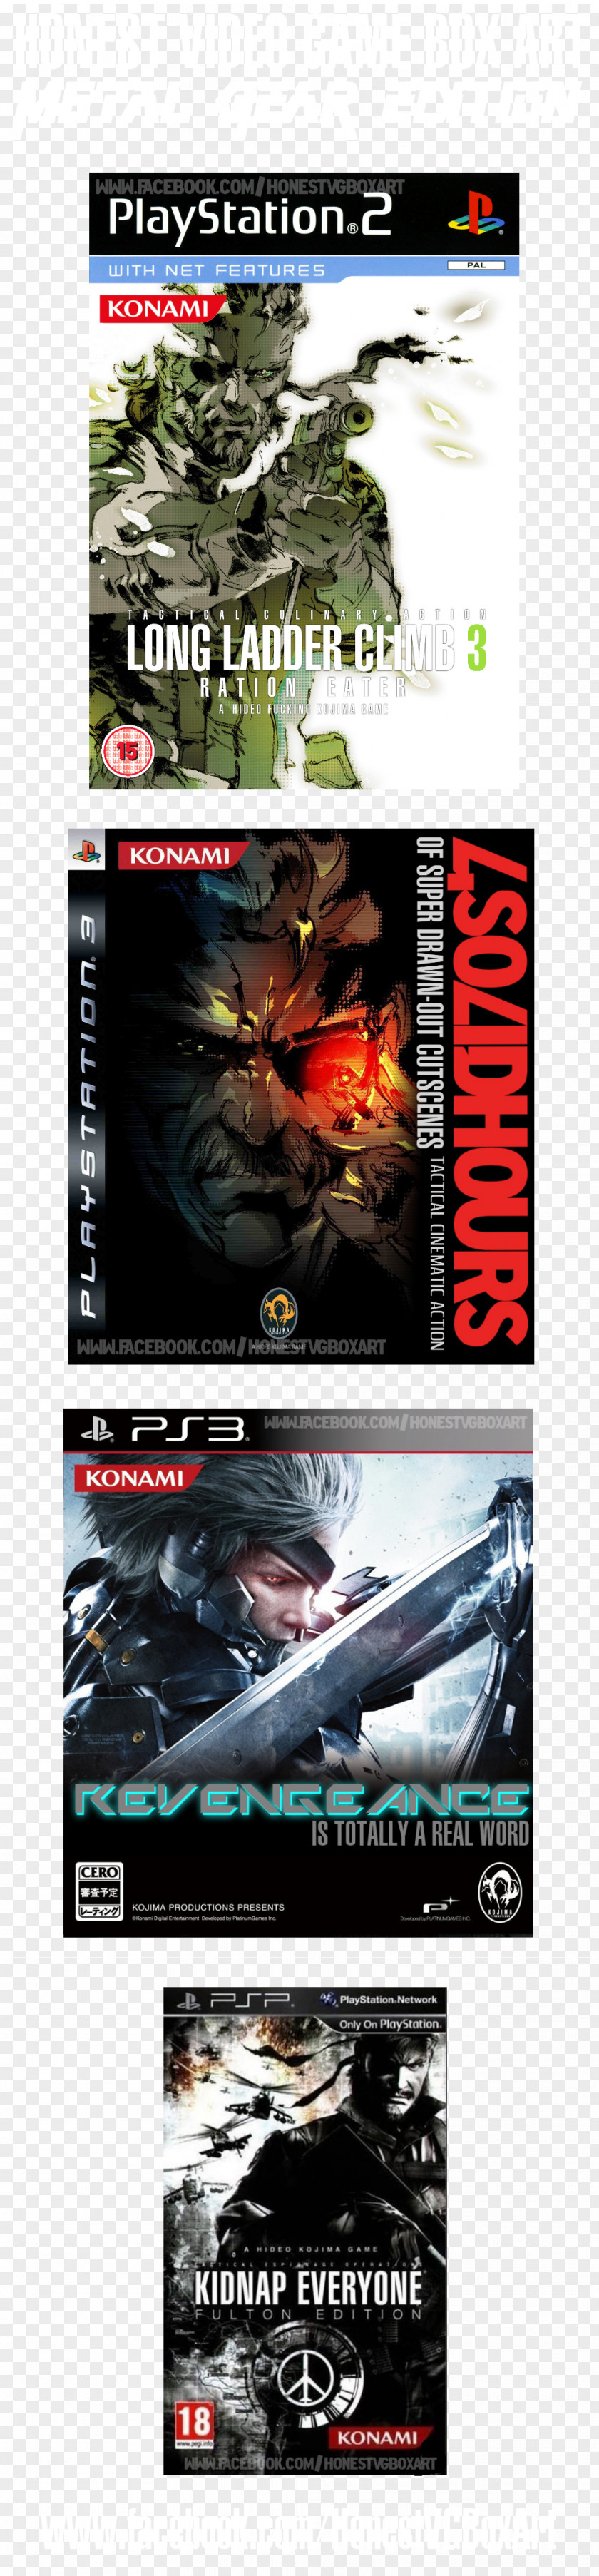 Metal Gear Rising: Revengeance Solid 3: Snake Eater Advertising PlayStation 3 Brand PNG